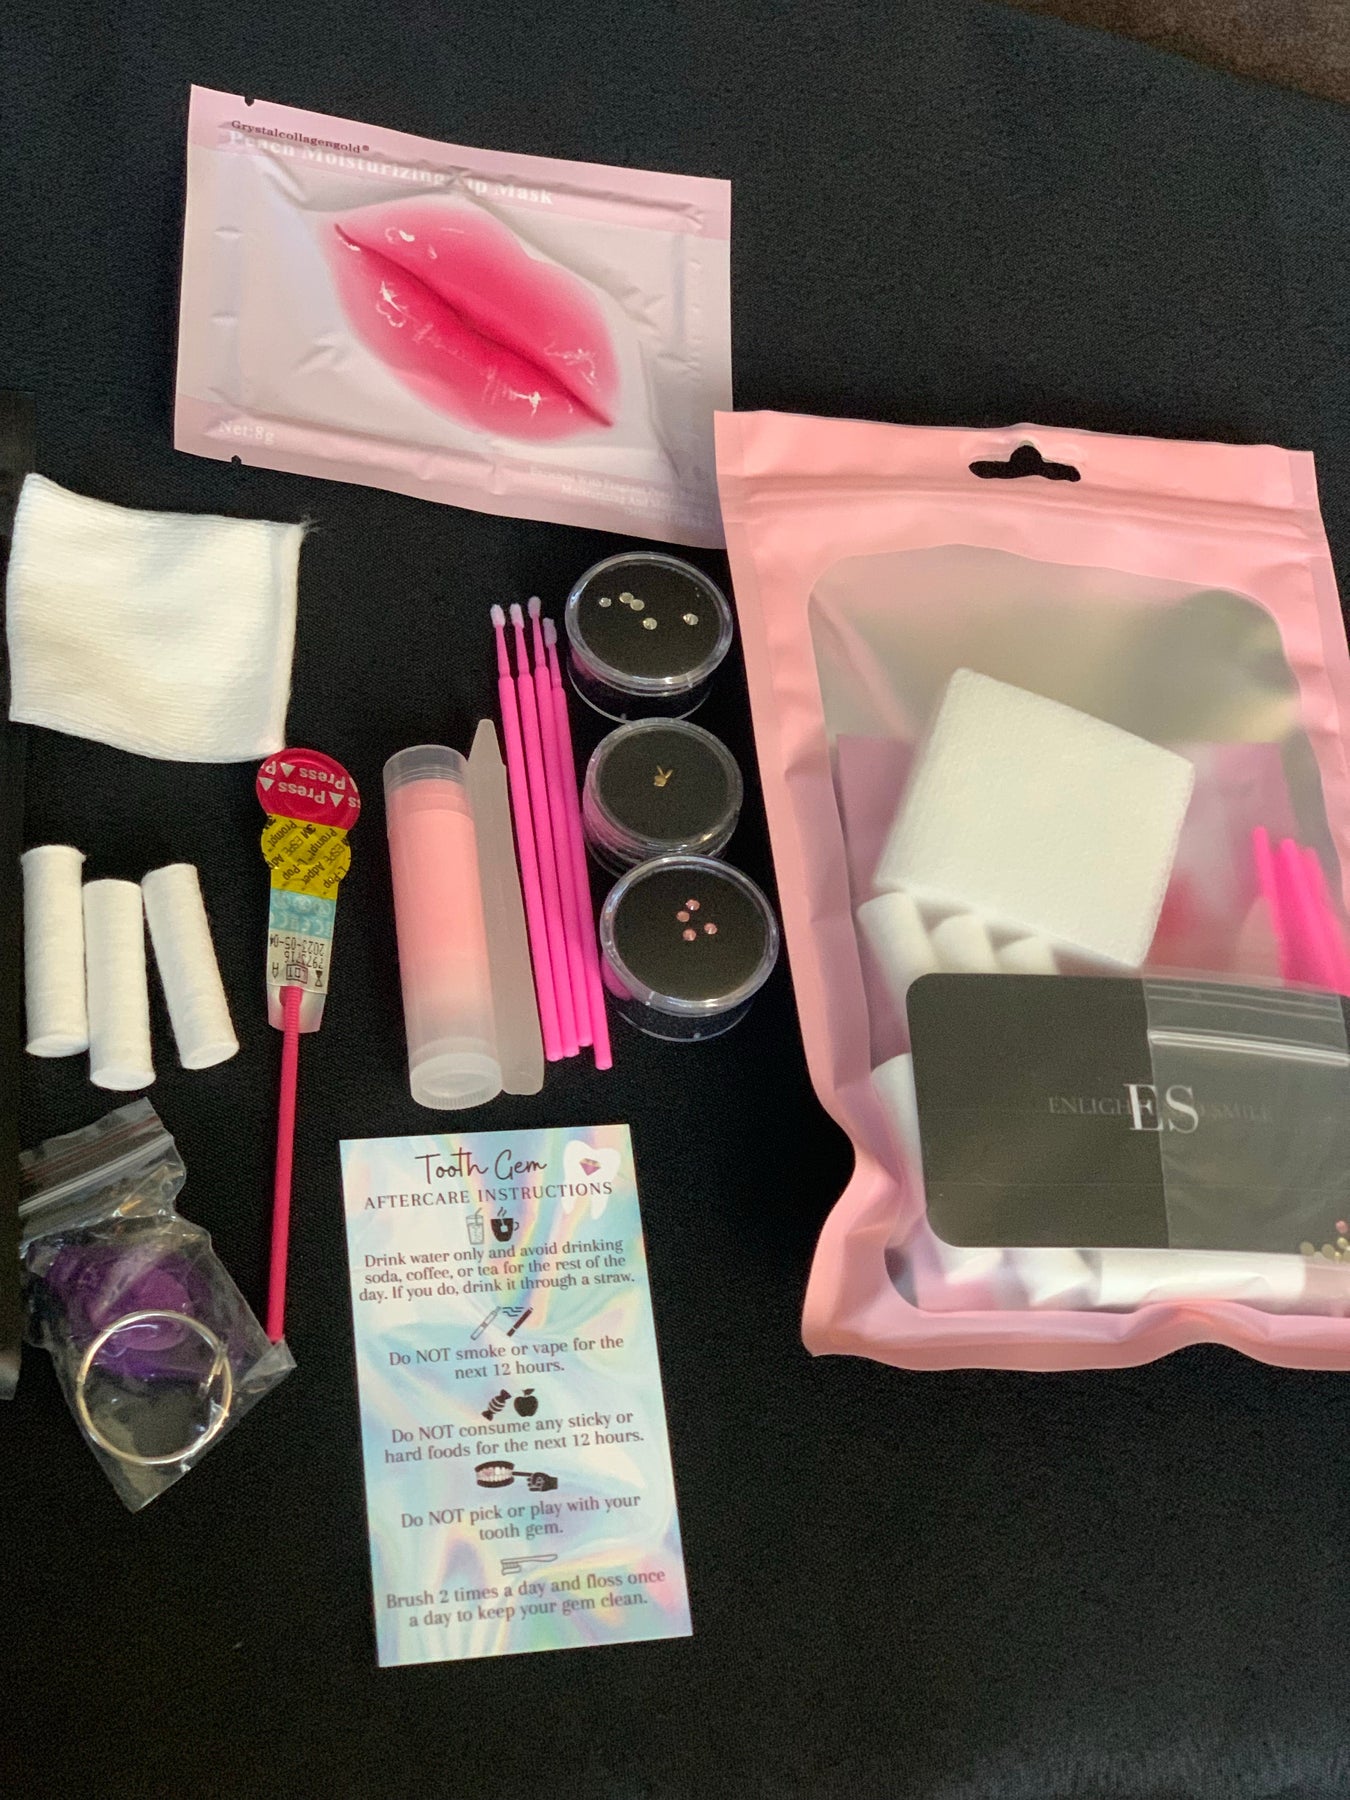 Tooth Gem Kit - DIY Tooth Gem Kit with Curing Light and Glue